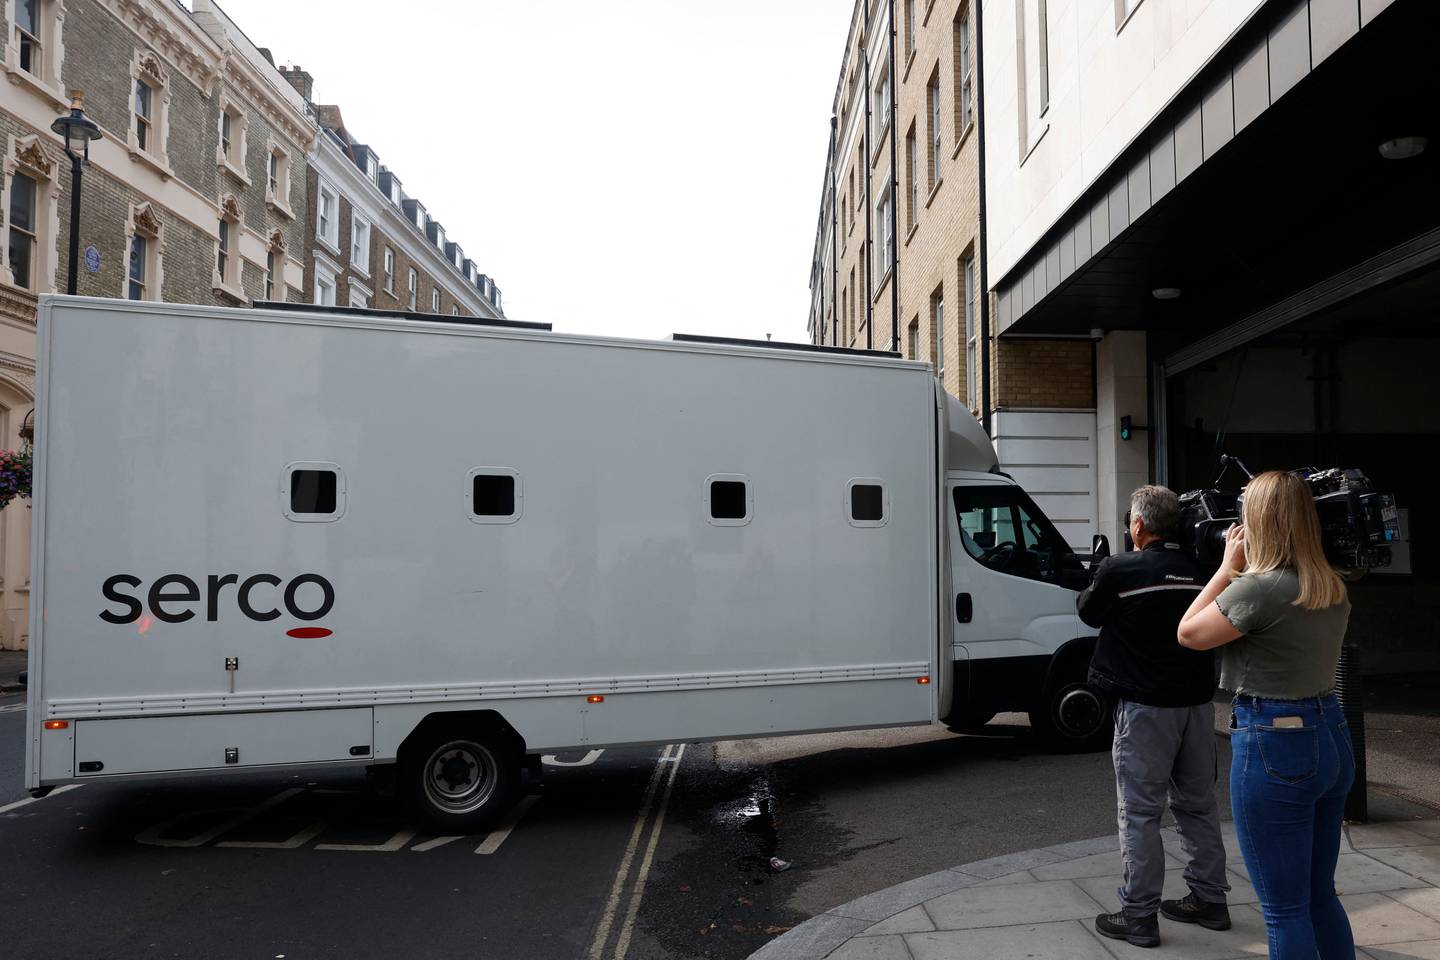 A van believed to be transporting Jaswant Singh Chail arrives at Westminster Magistrates' Court. AFP